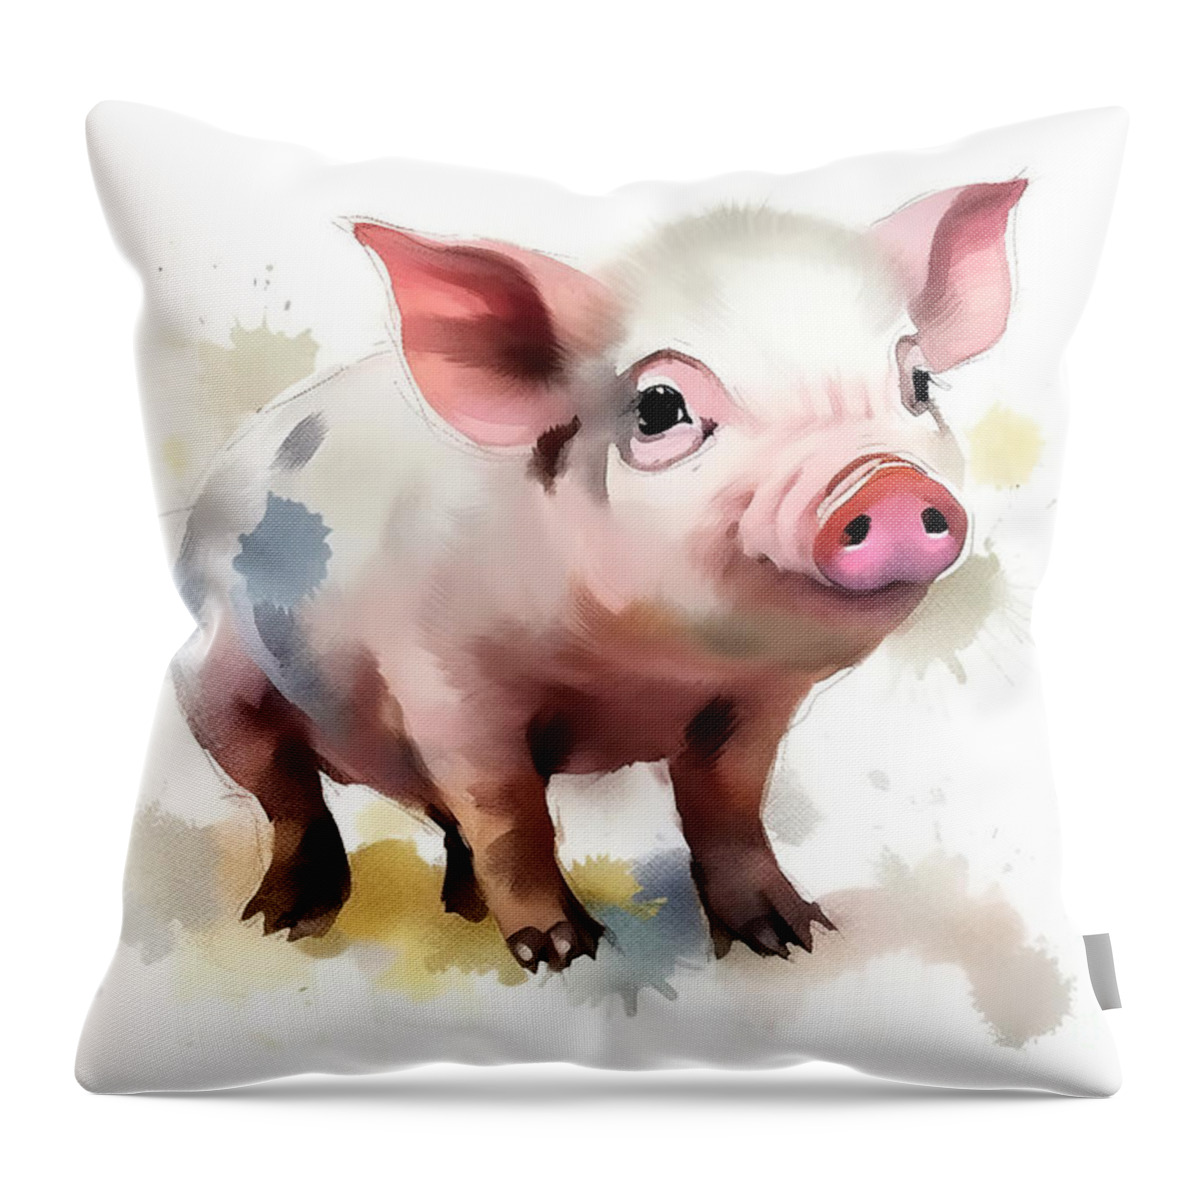 Cute Throw Pillow featuring the painting Illustration of watercolor cute baby pig, by N Akkash